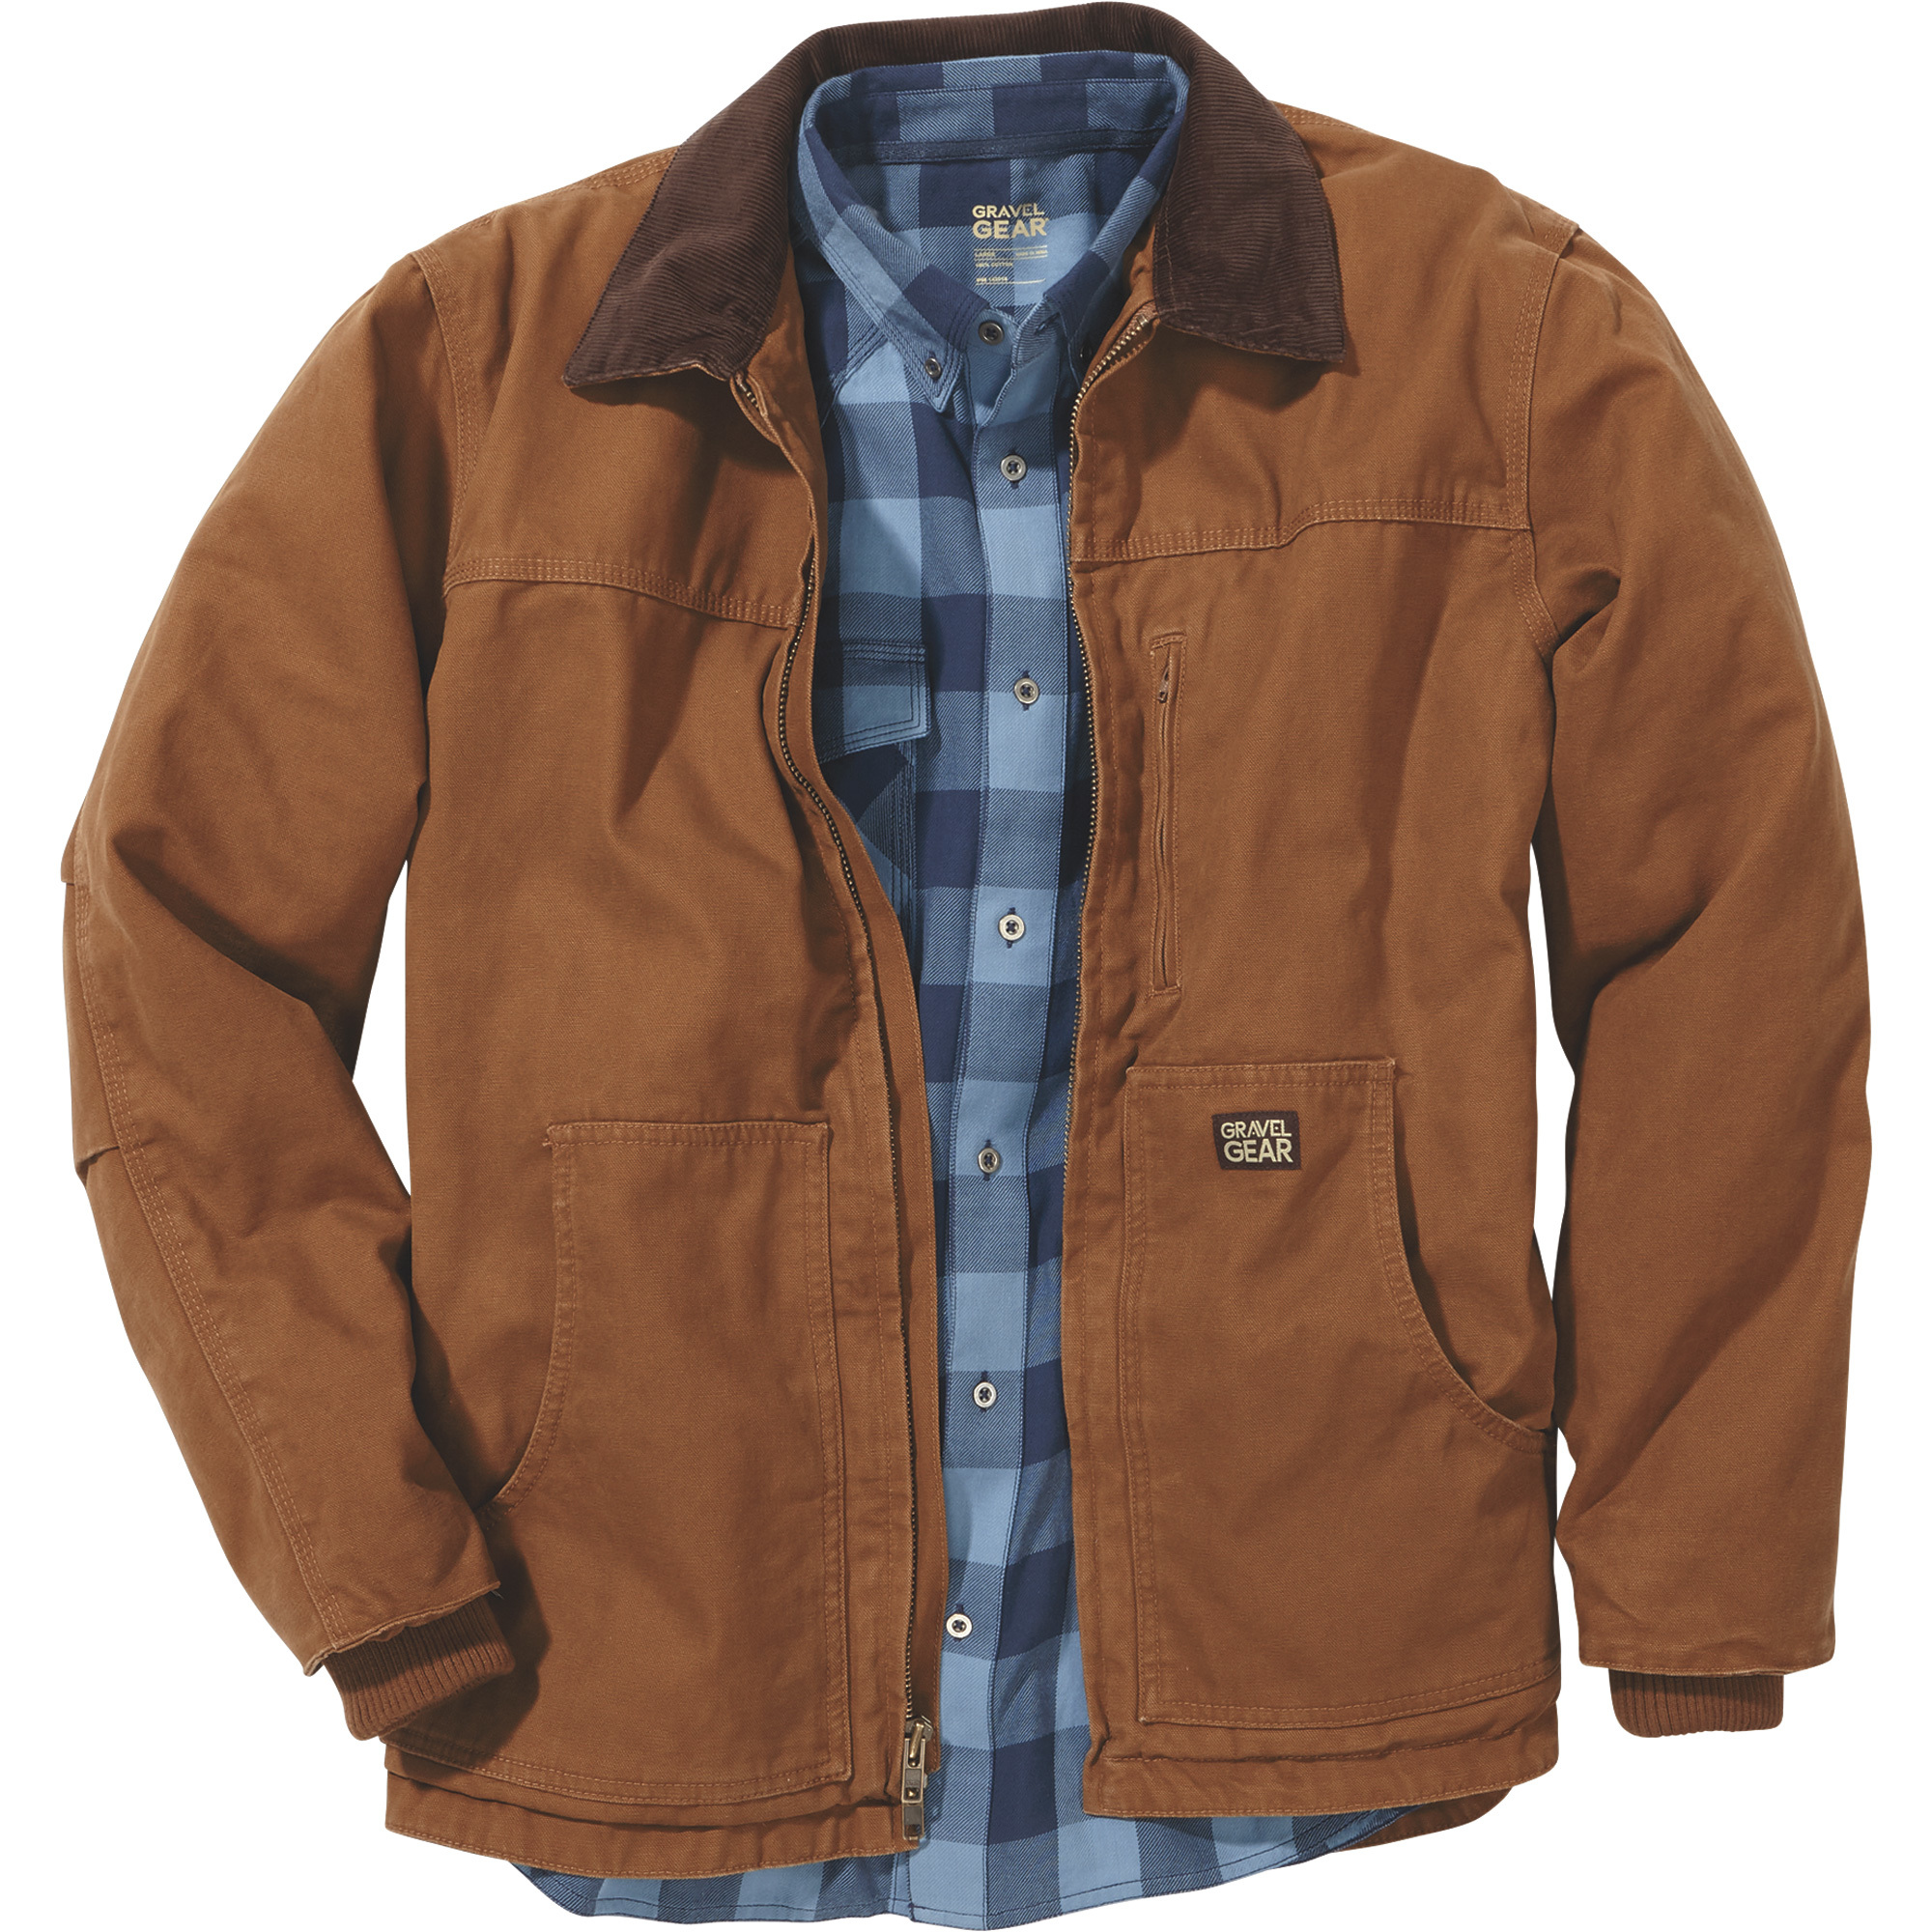 Gravel Gear Men's Washed Duck Chore Coat - Brown, Large